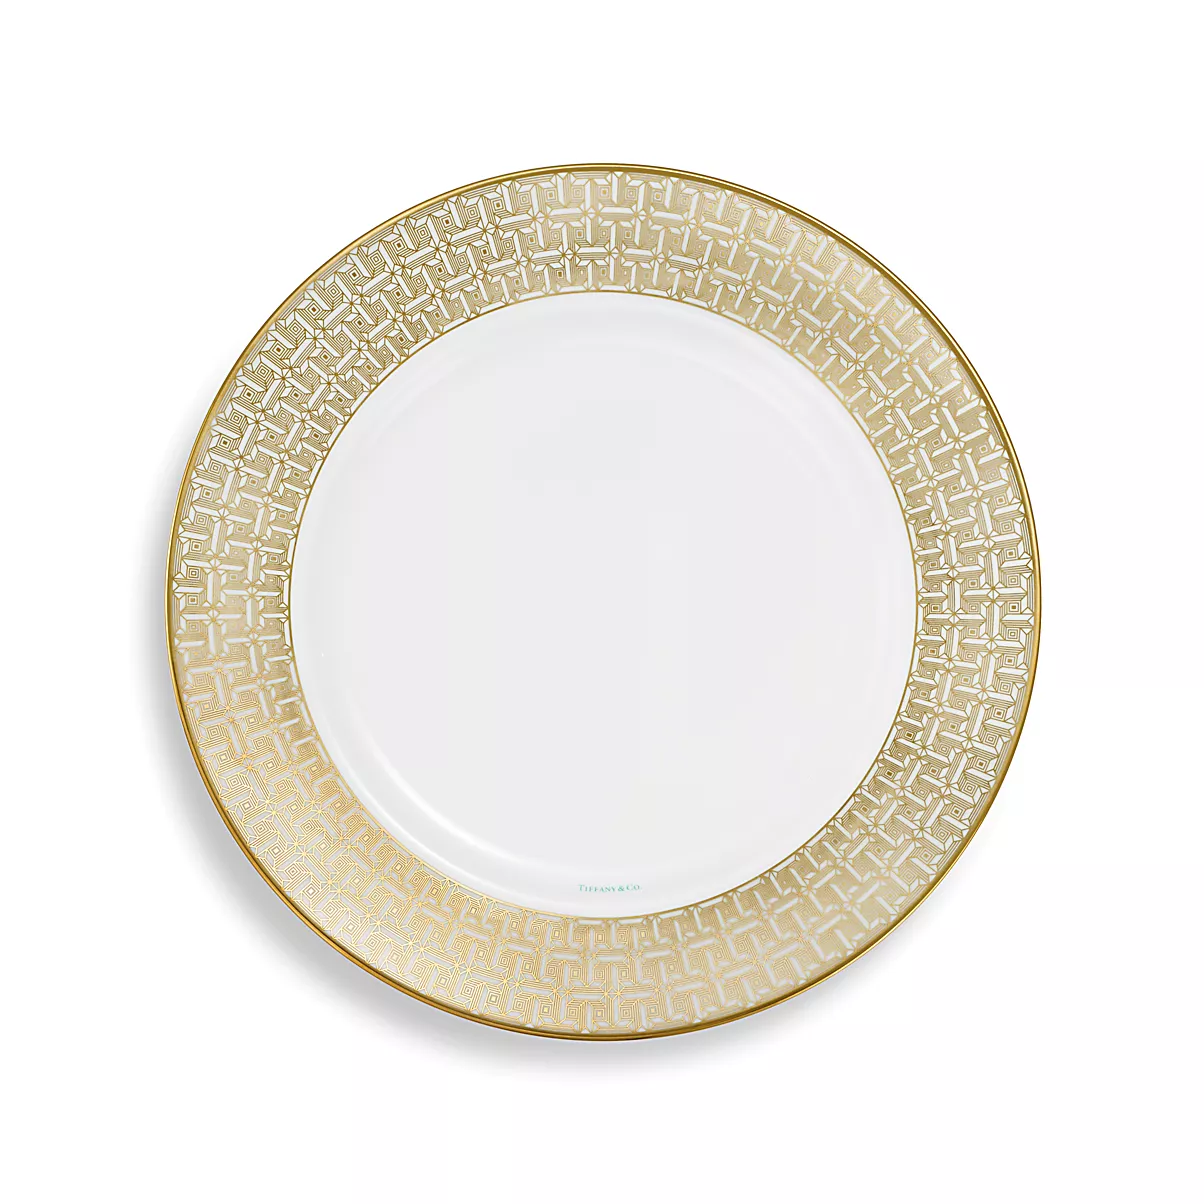 No Legal Collection Dinnerware 포슬린 0 OUNCE